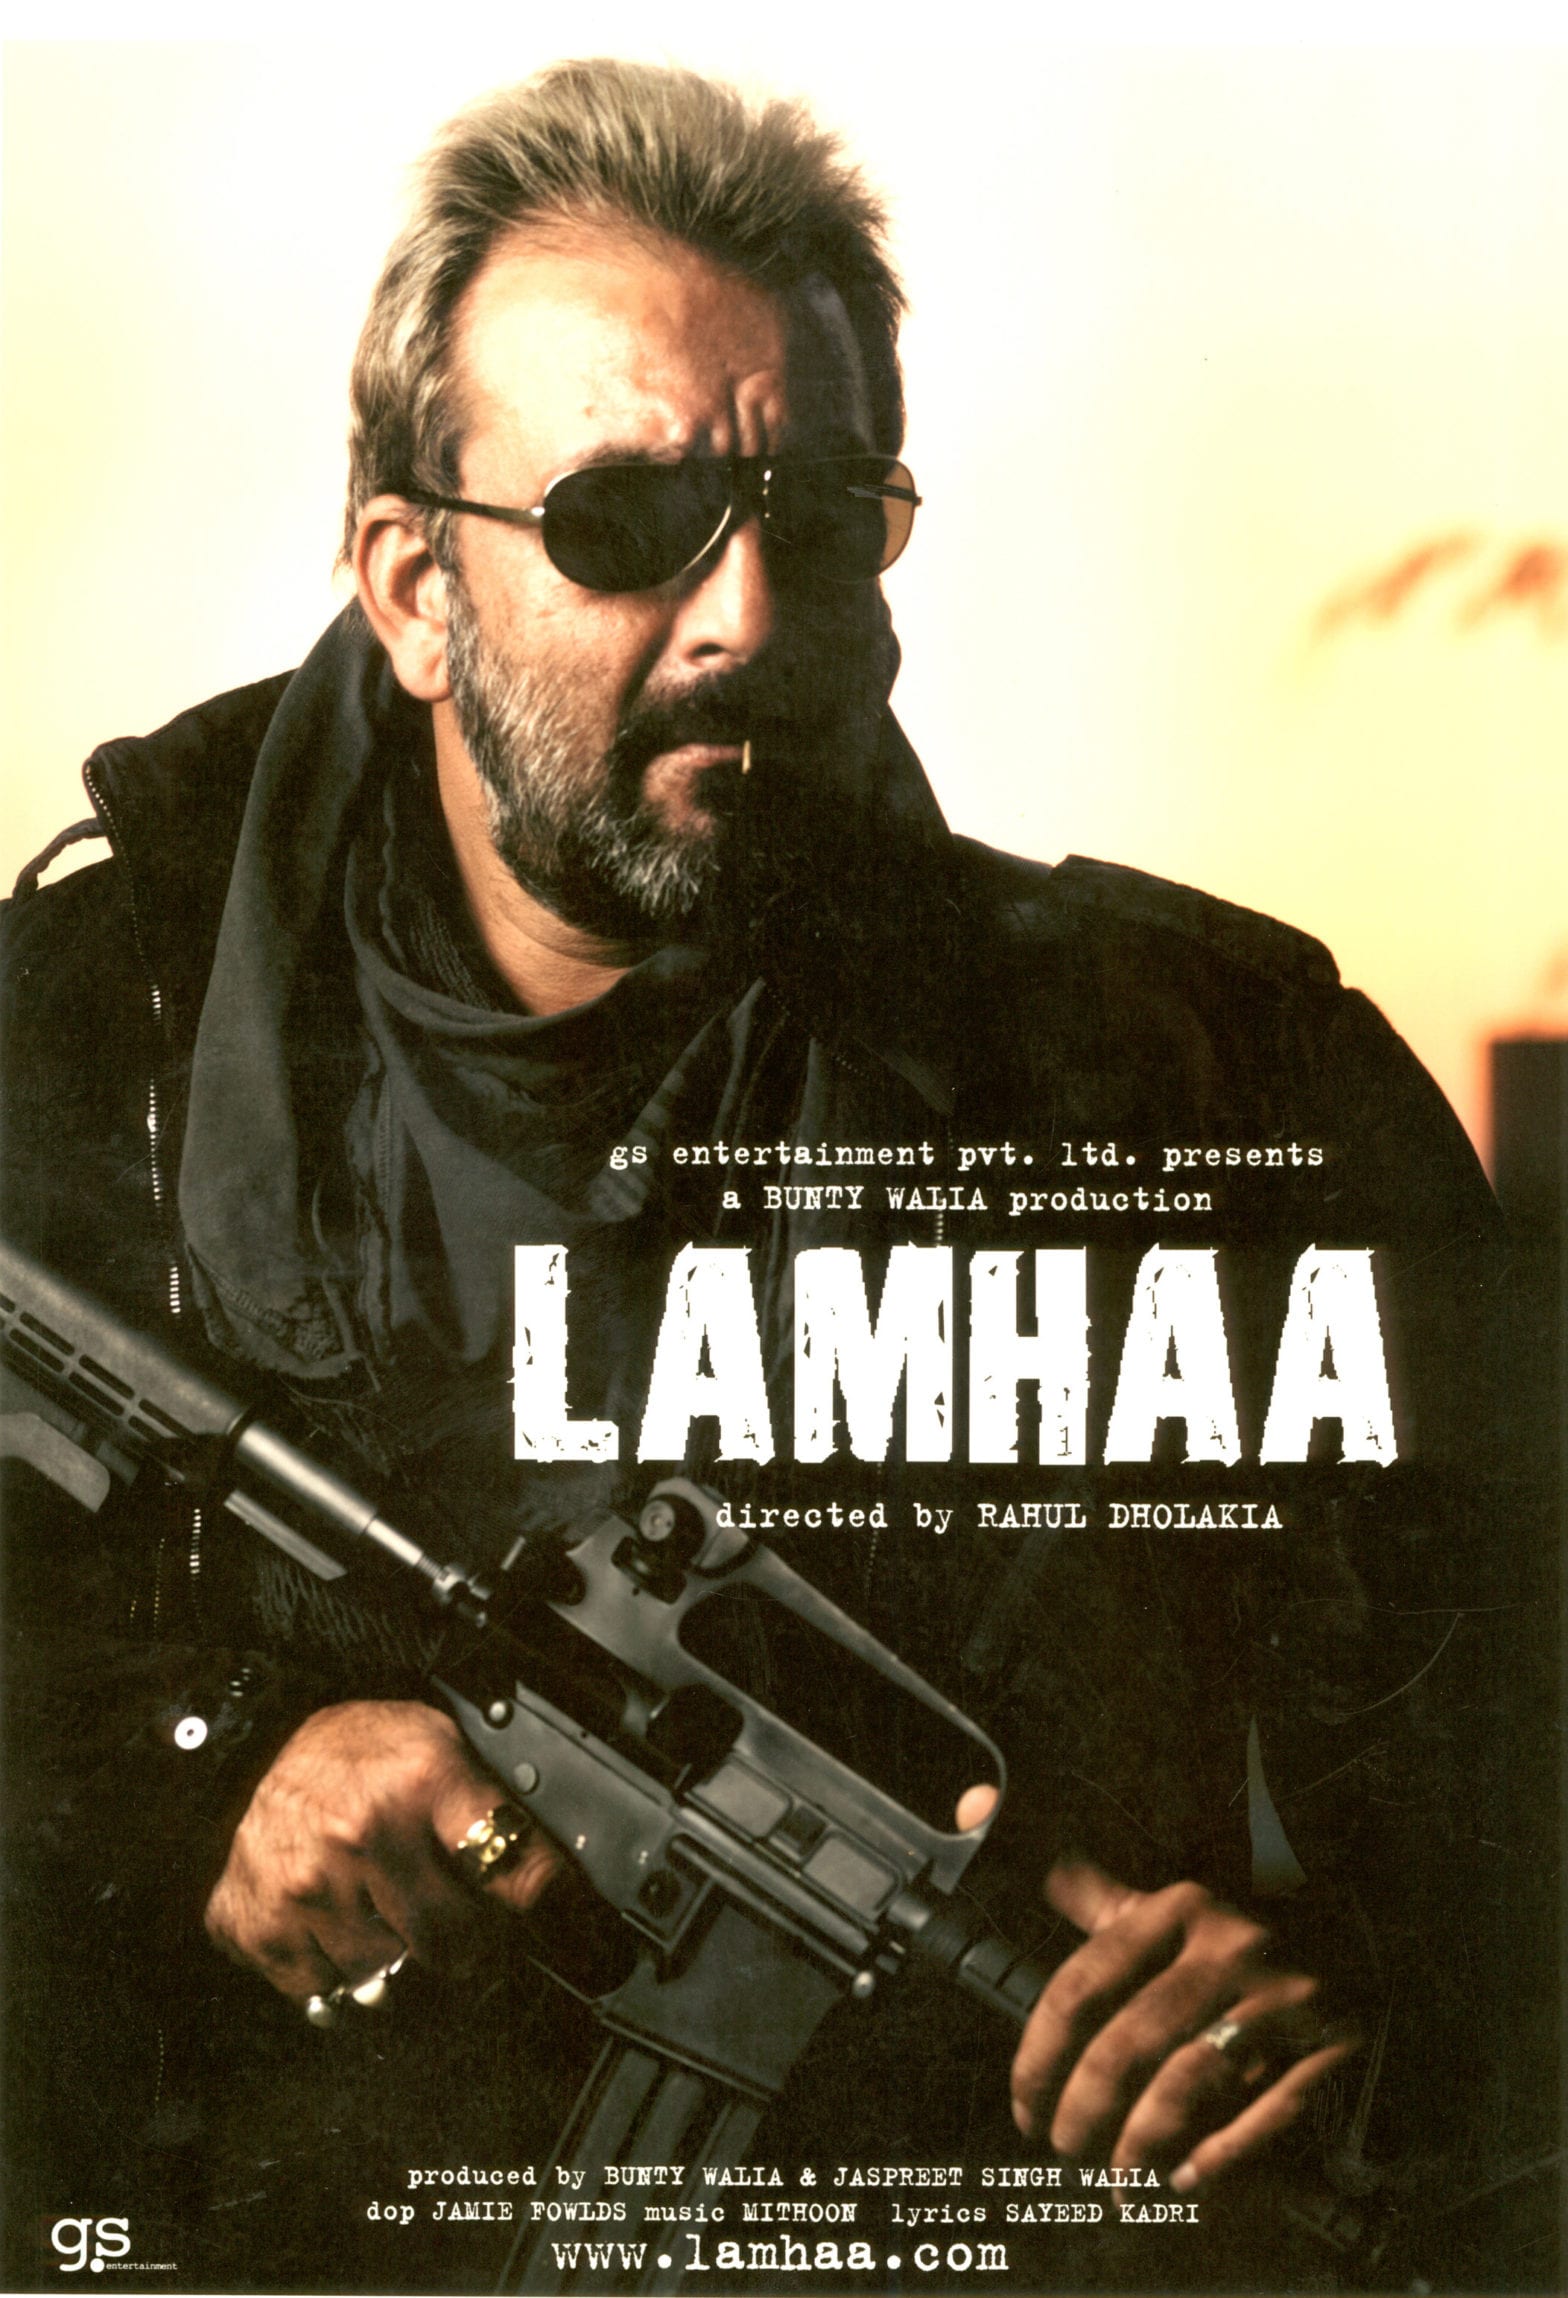 Poster for the movie "Lamhaa"